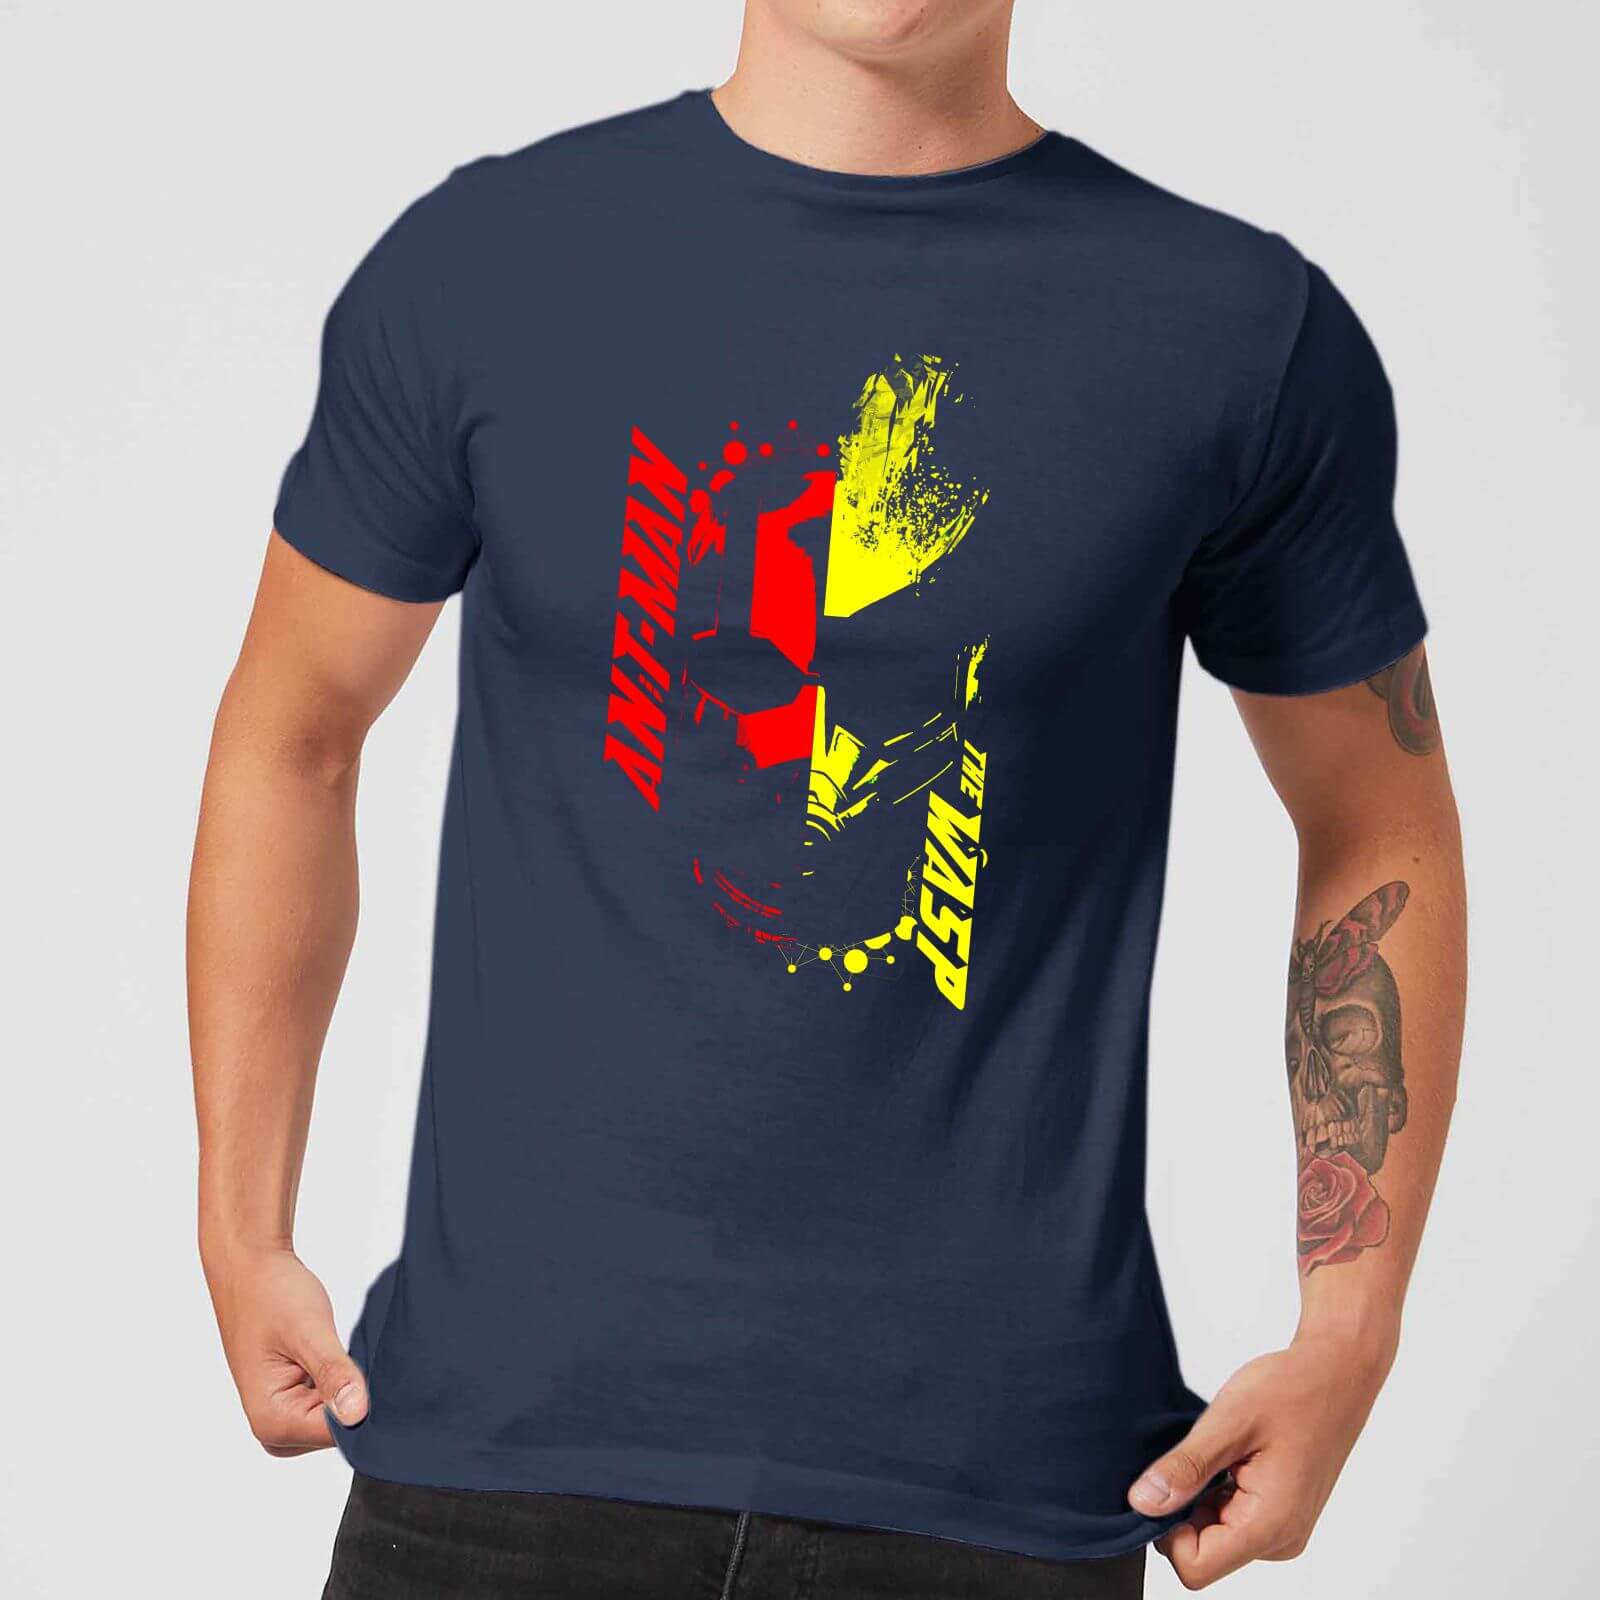 Ant-Man And The Wasp Split Face Herren T-Shirt - Navy Blau - S